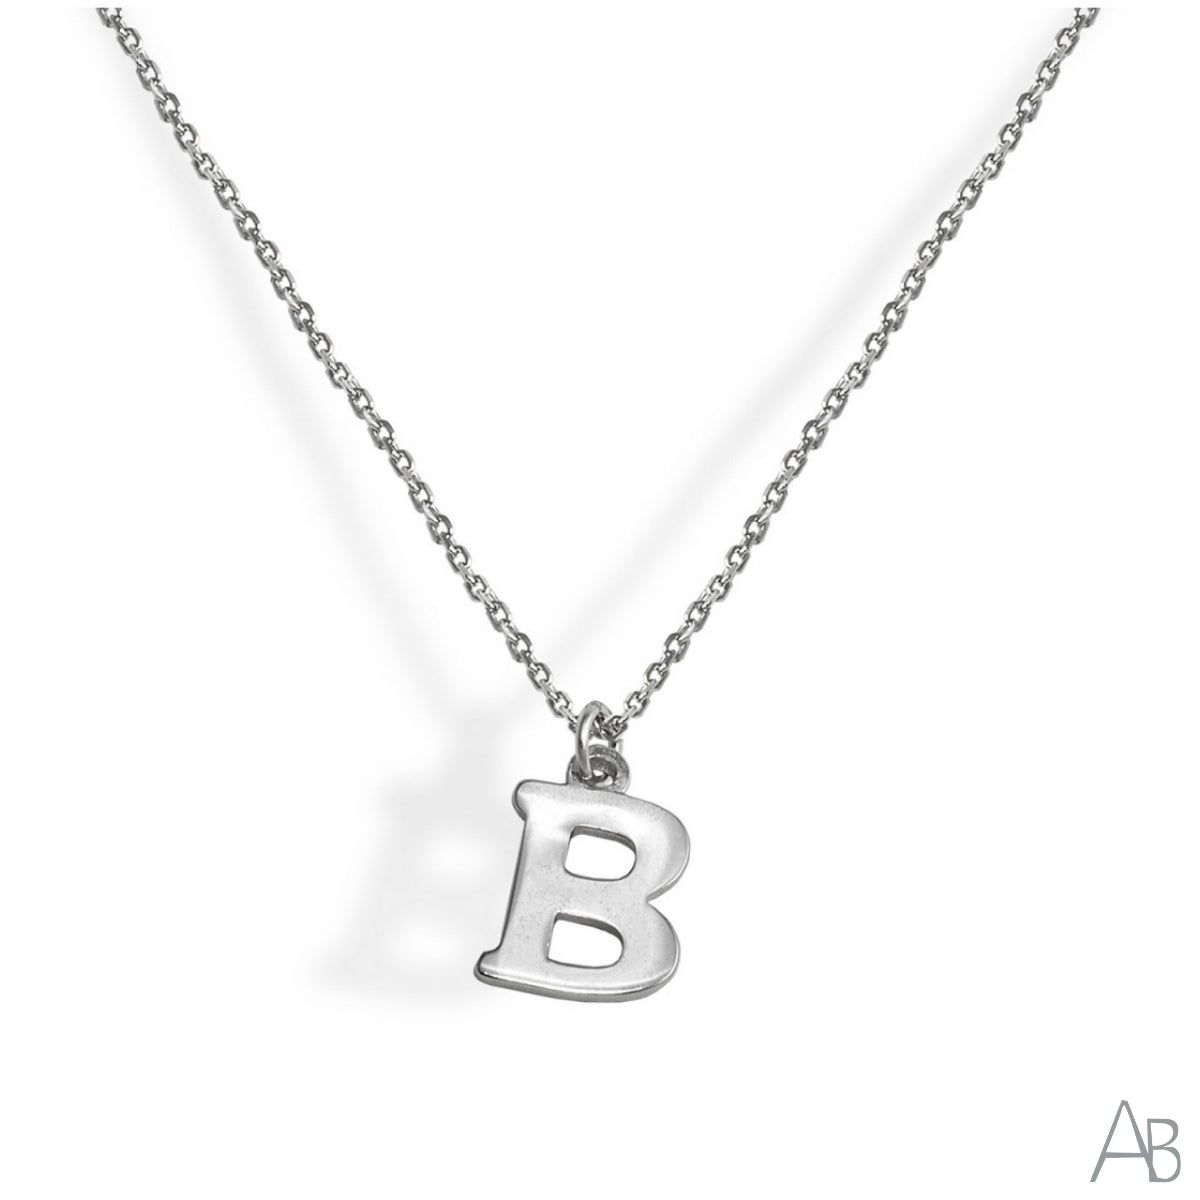 SILVER NECKLACE LETTER B